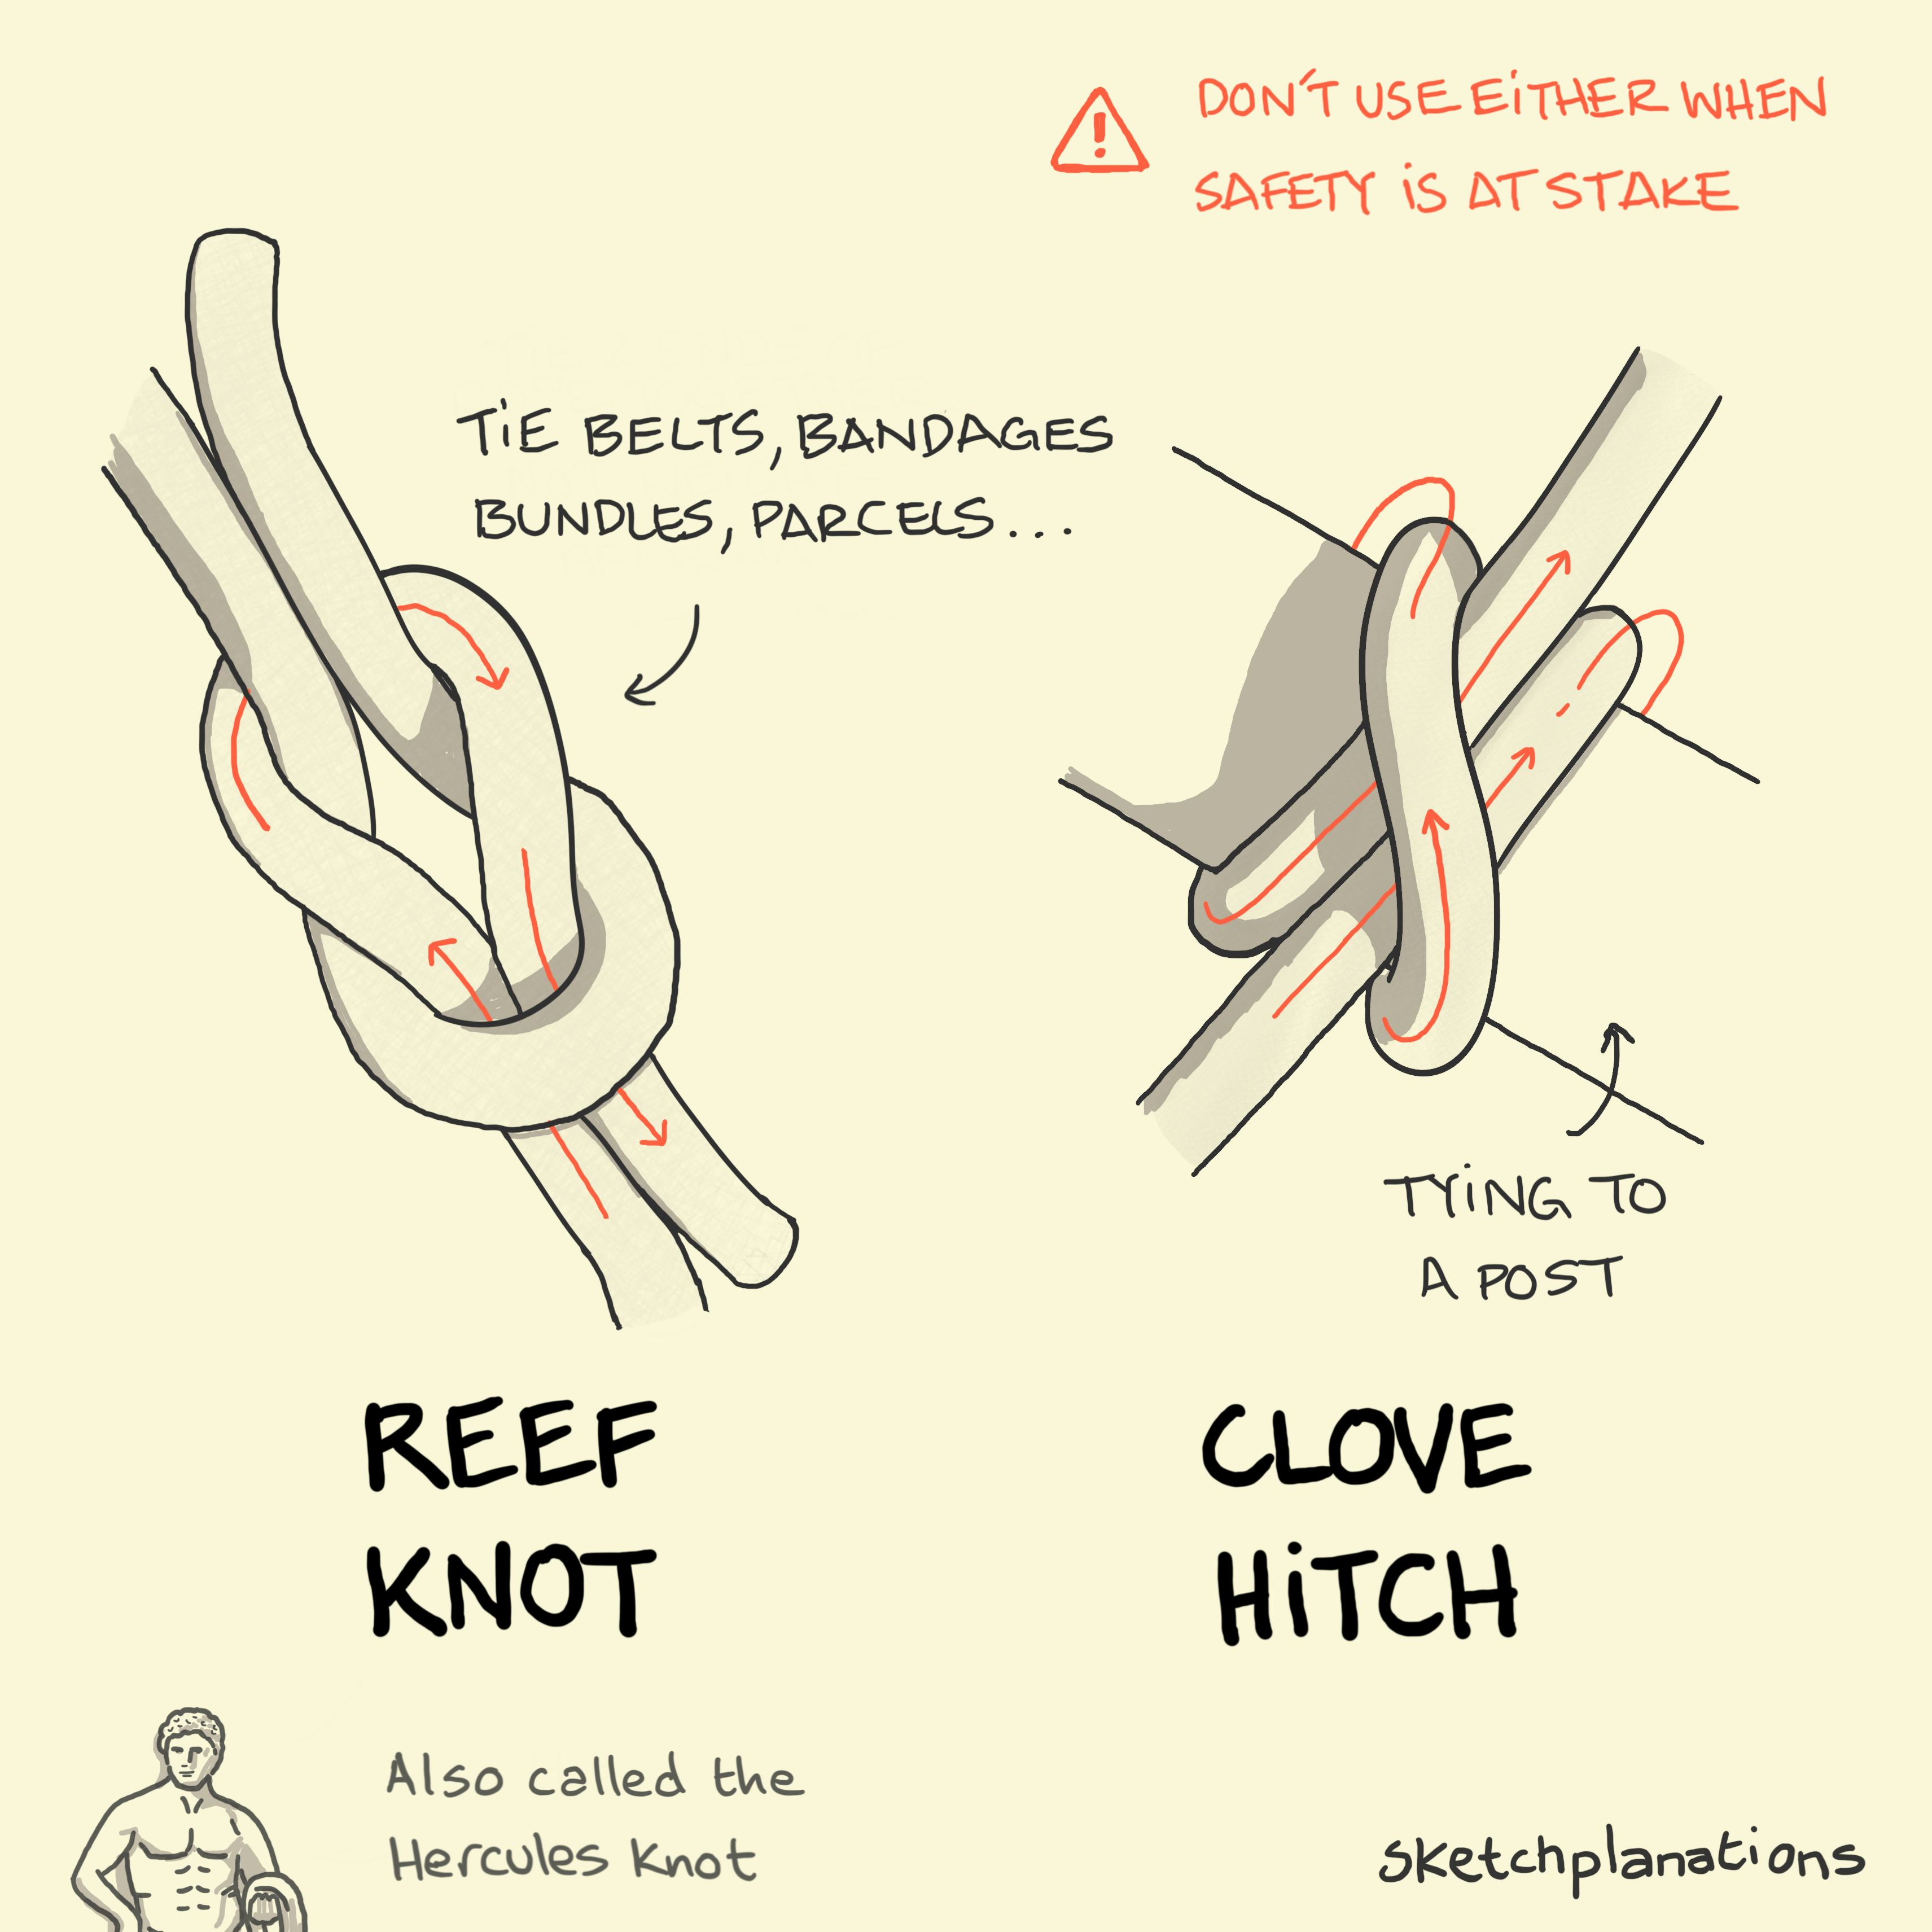 Reef knot and clove hitch - Sketchplanations